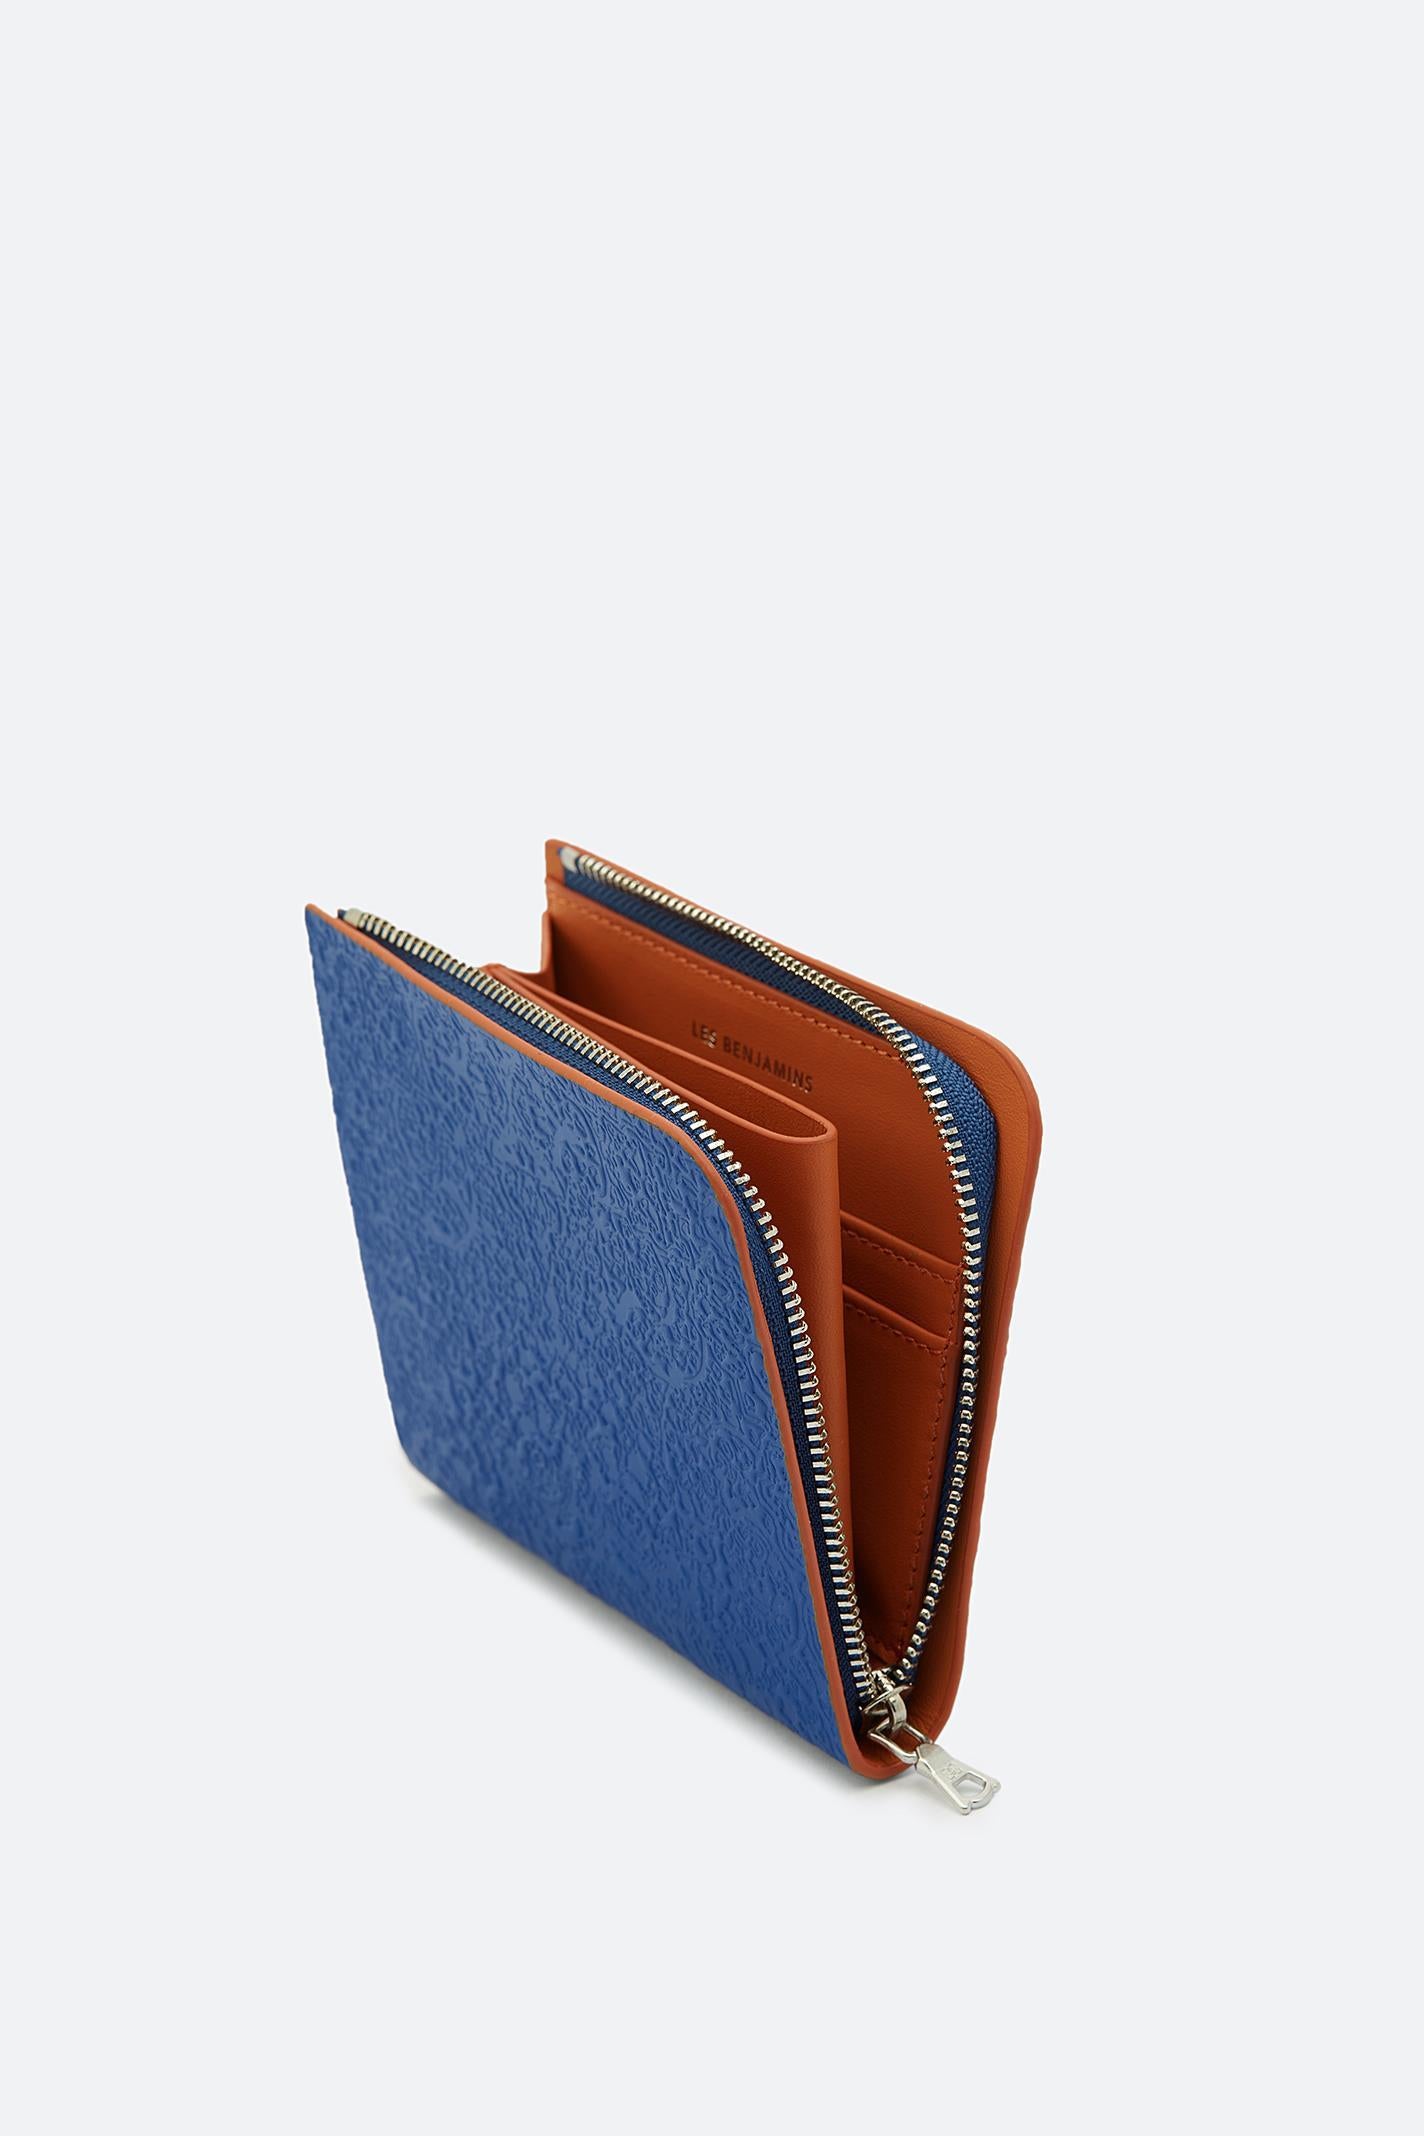  EMBOSSED LARGE ZIPPED WALLET 068